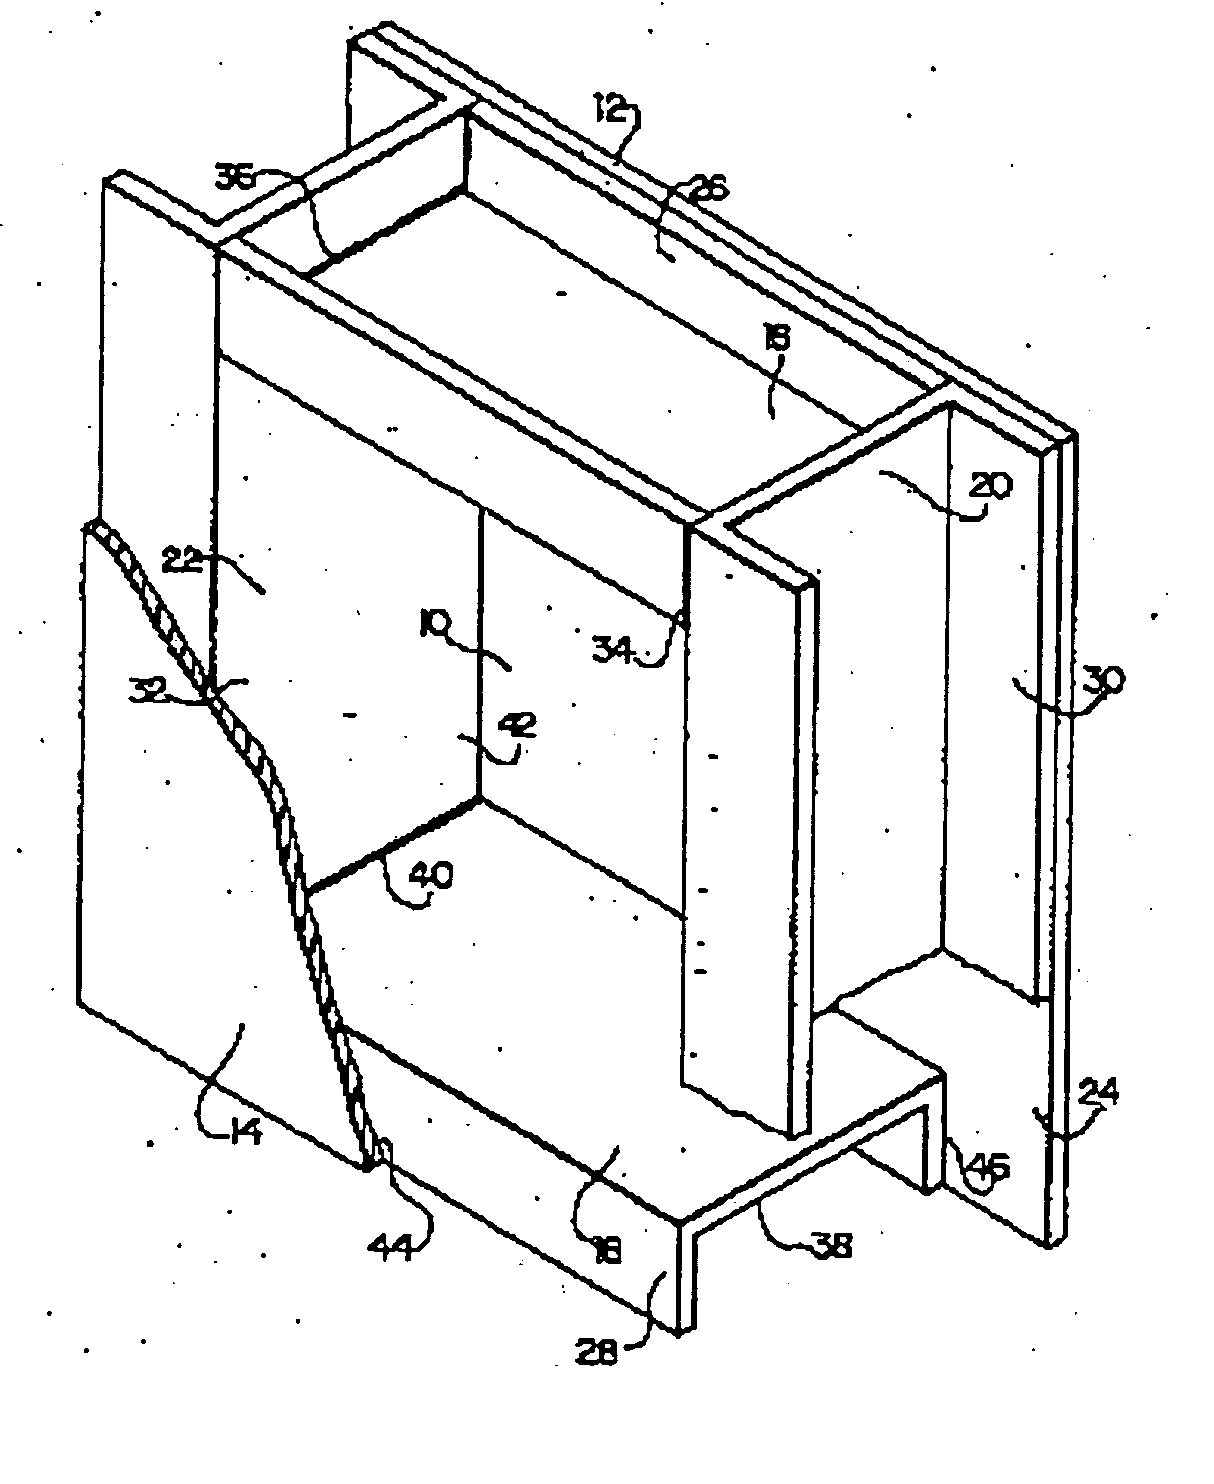 Structure for multiple-effect distillation using tubes or plates